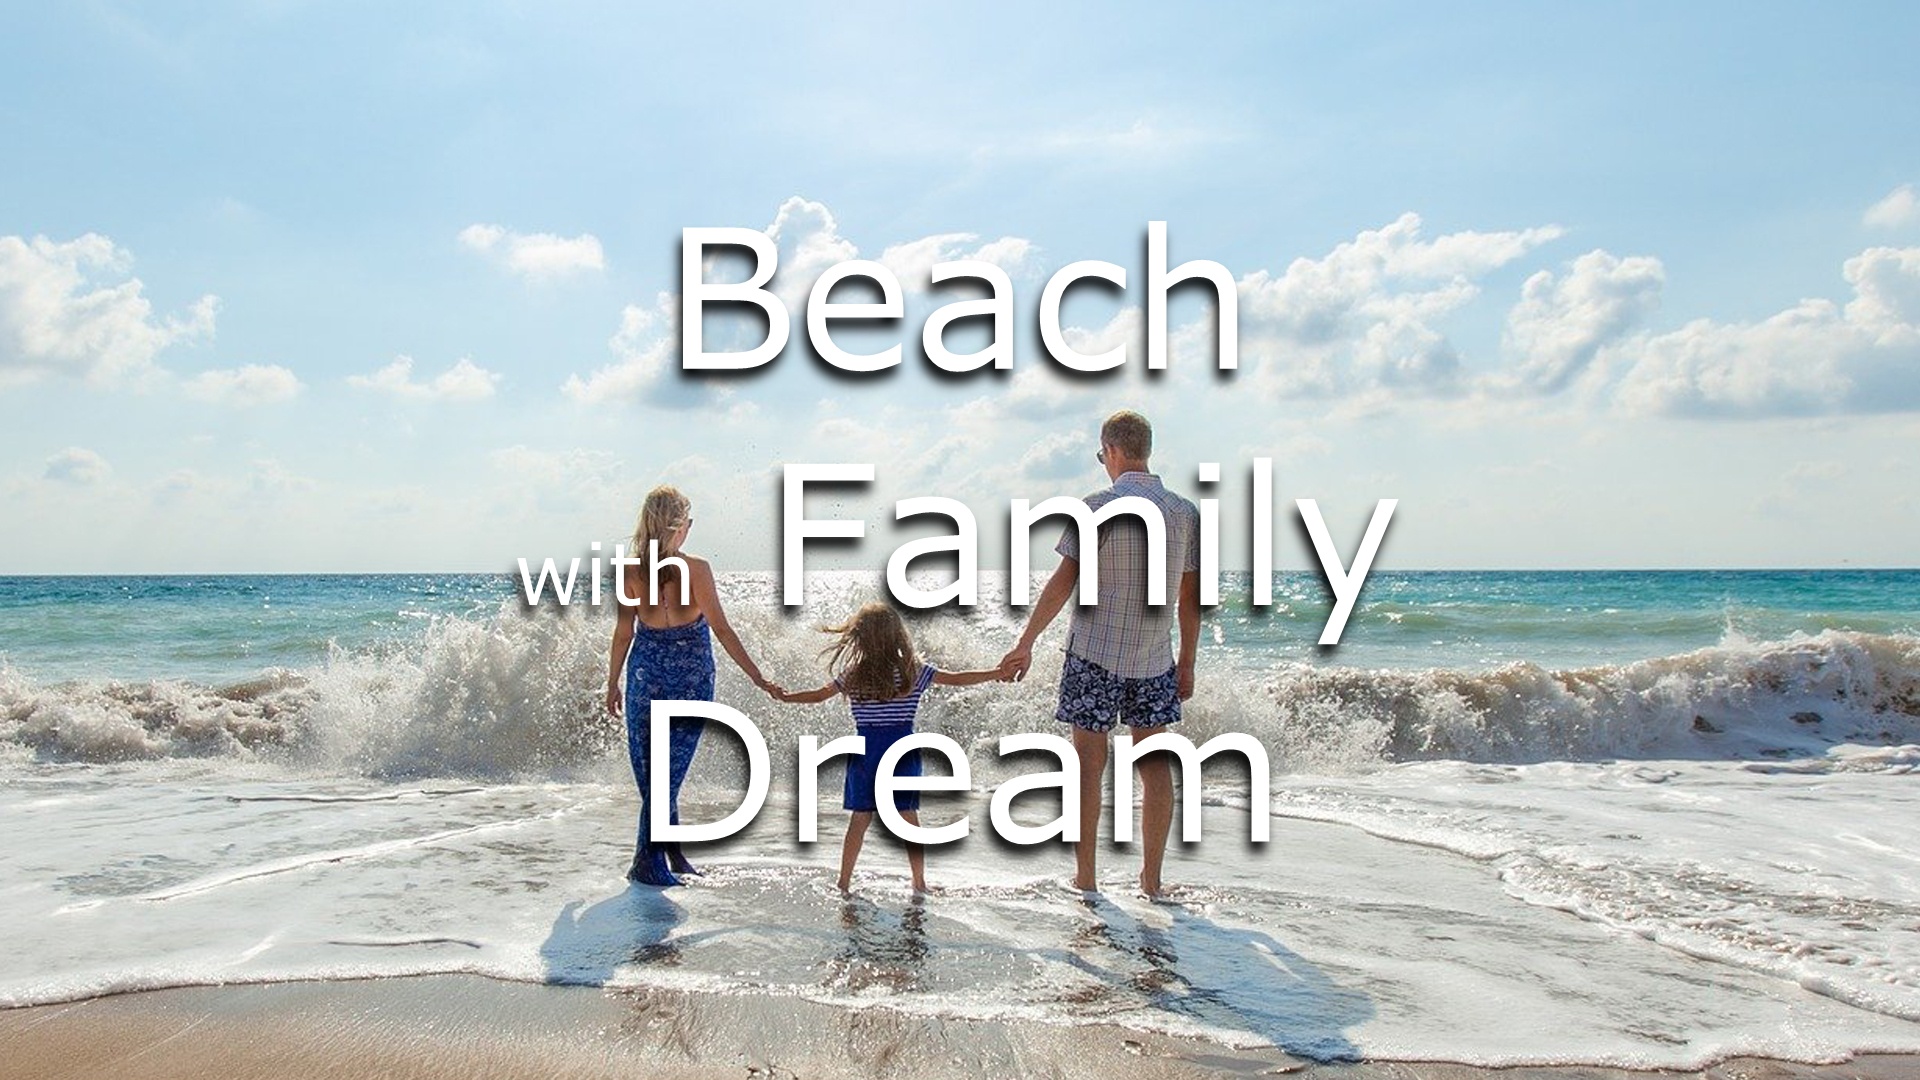 dreaming of beach with family